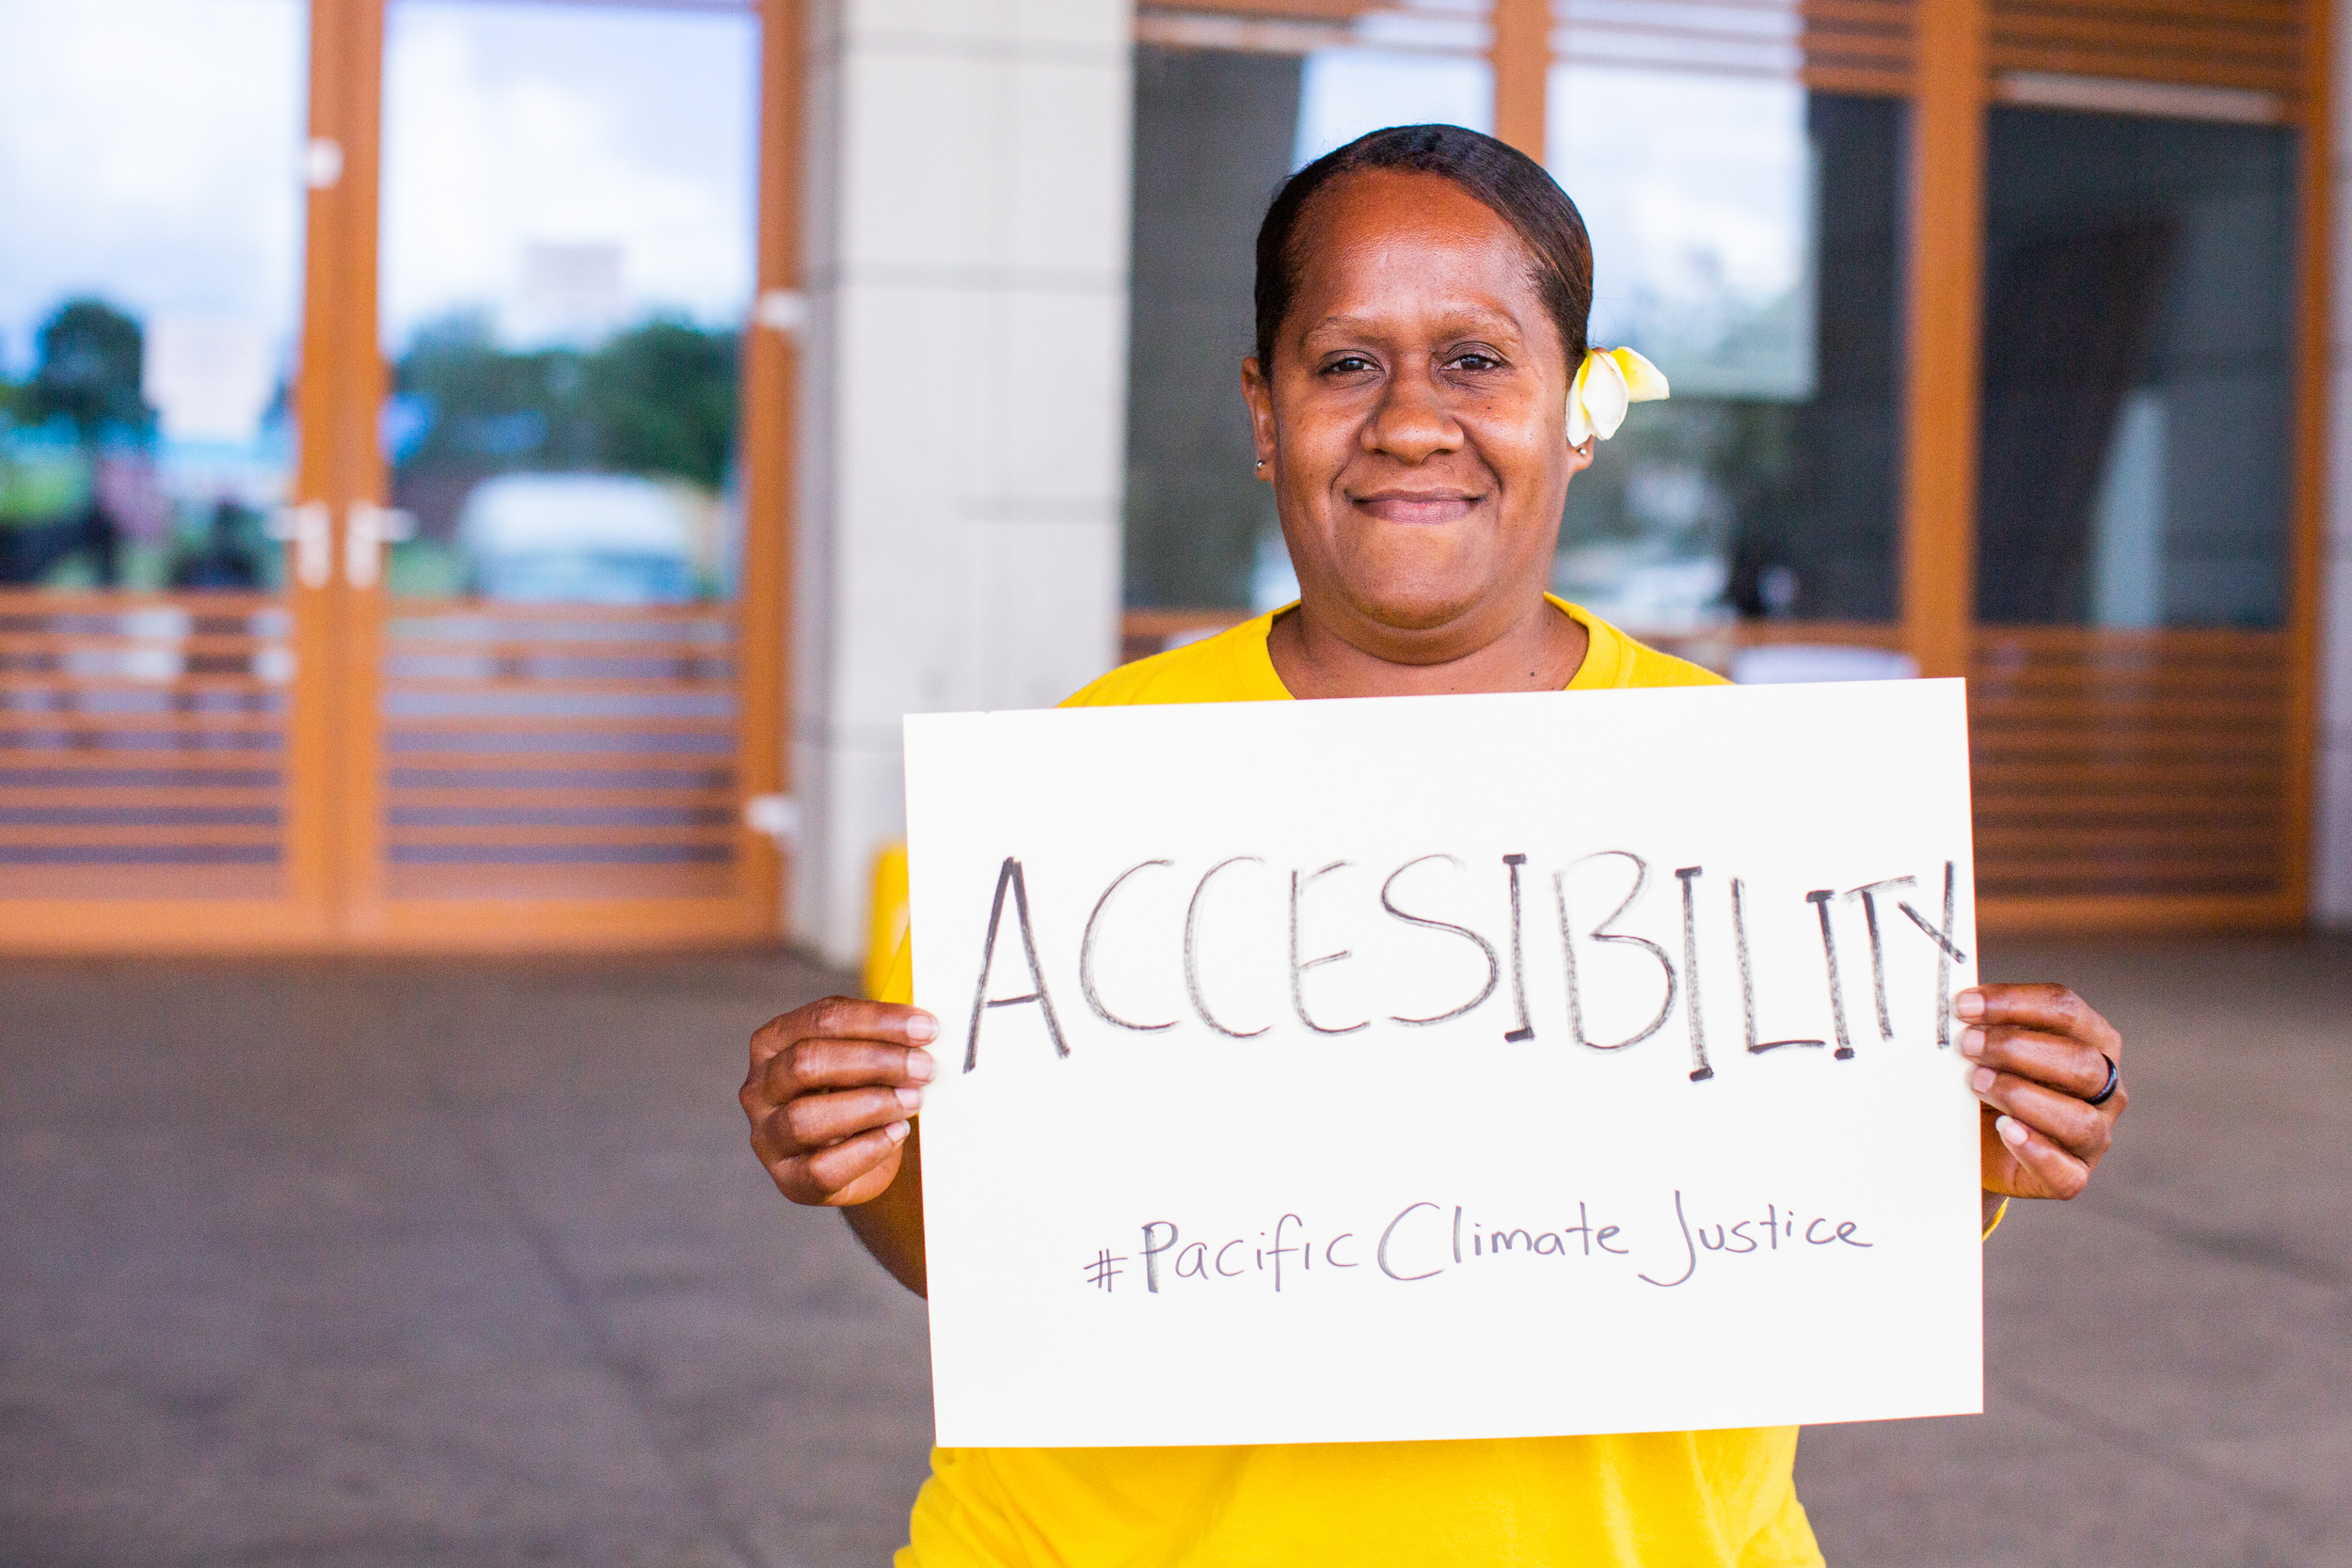 Portrait of woman holding a sign saying 'Accessibility'